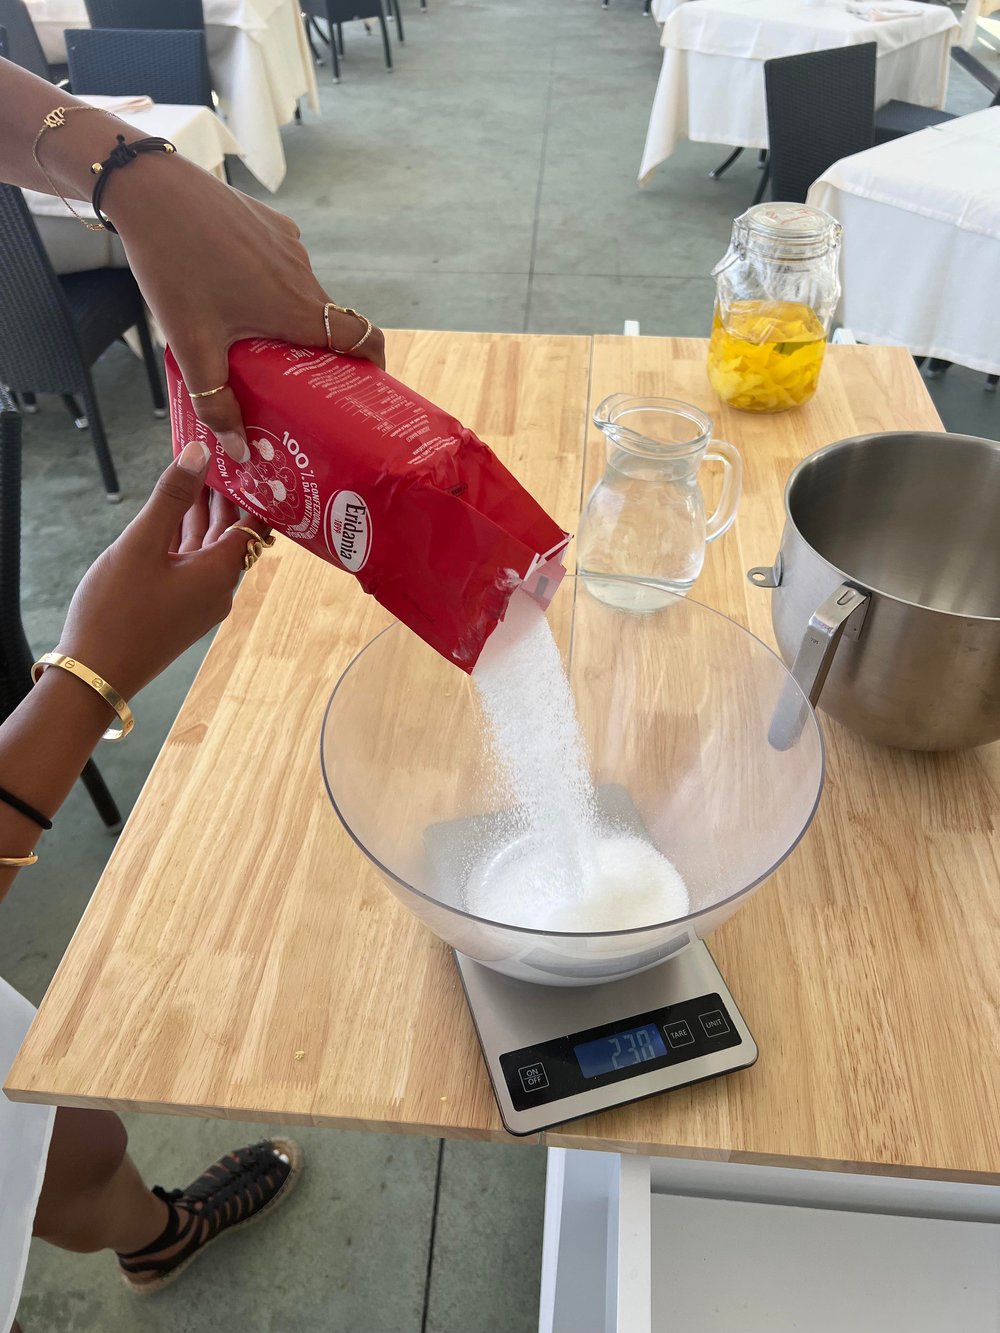 Measure out 700g of Sugar